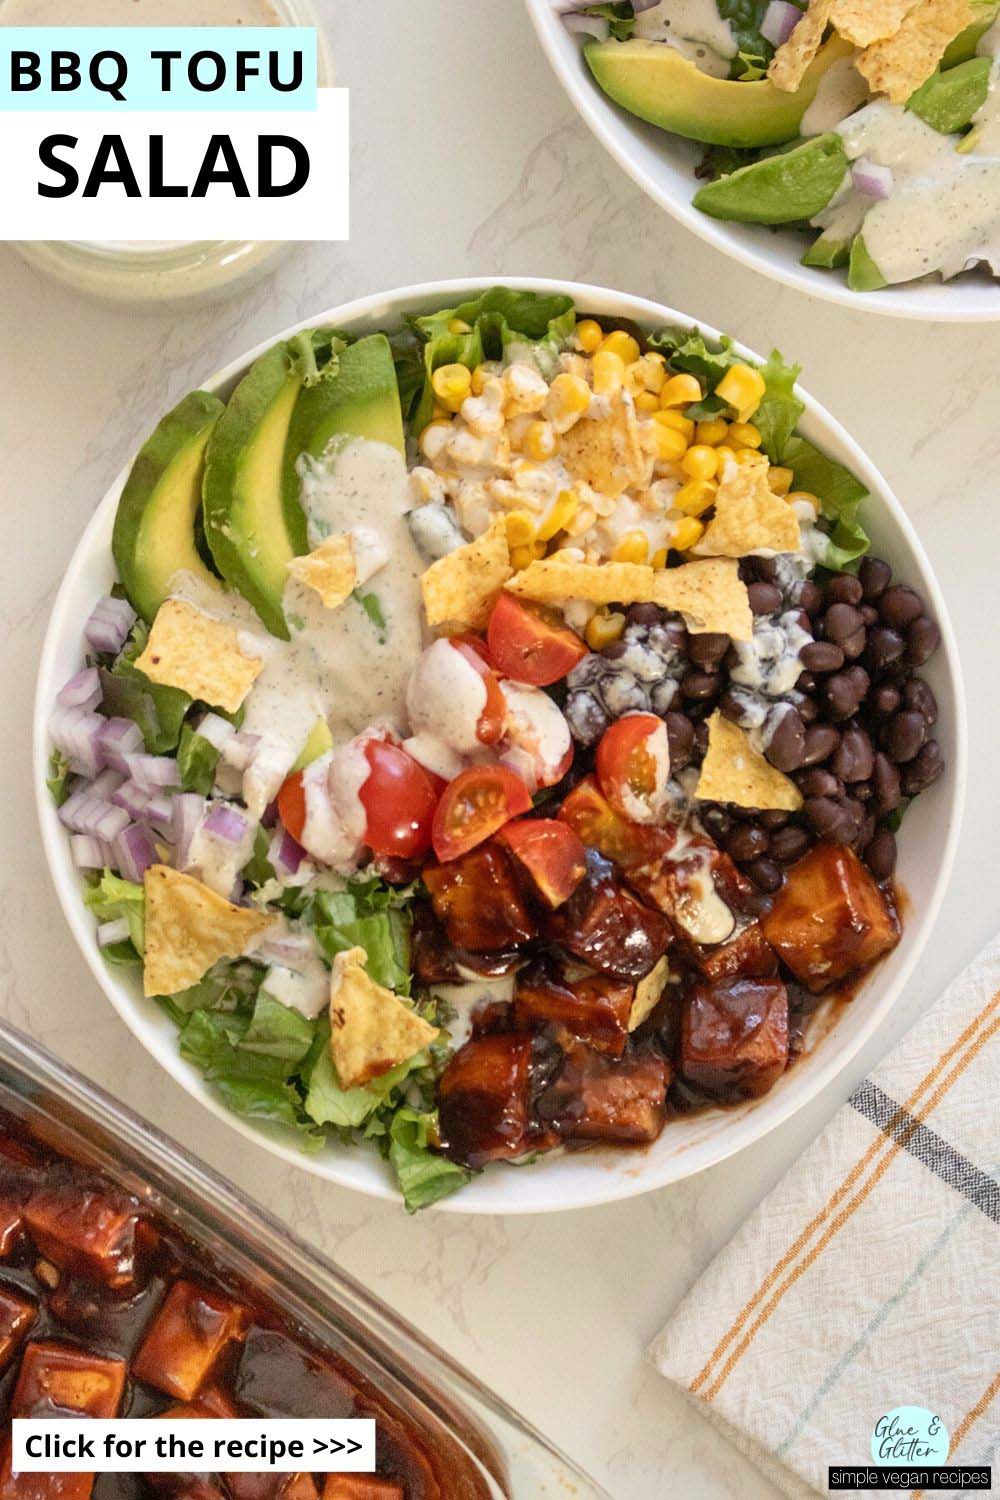 bbq tofu salad with avocado, beans, corn, tomato, and ranch dressing in bowls on a white table, text overlay